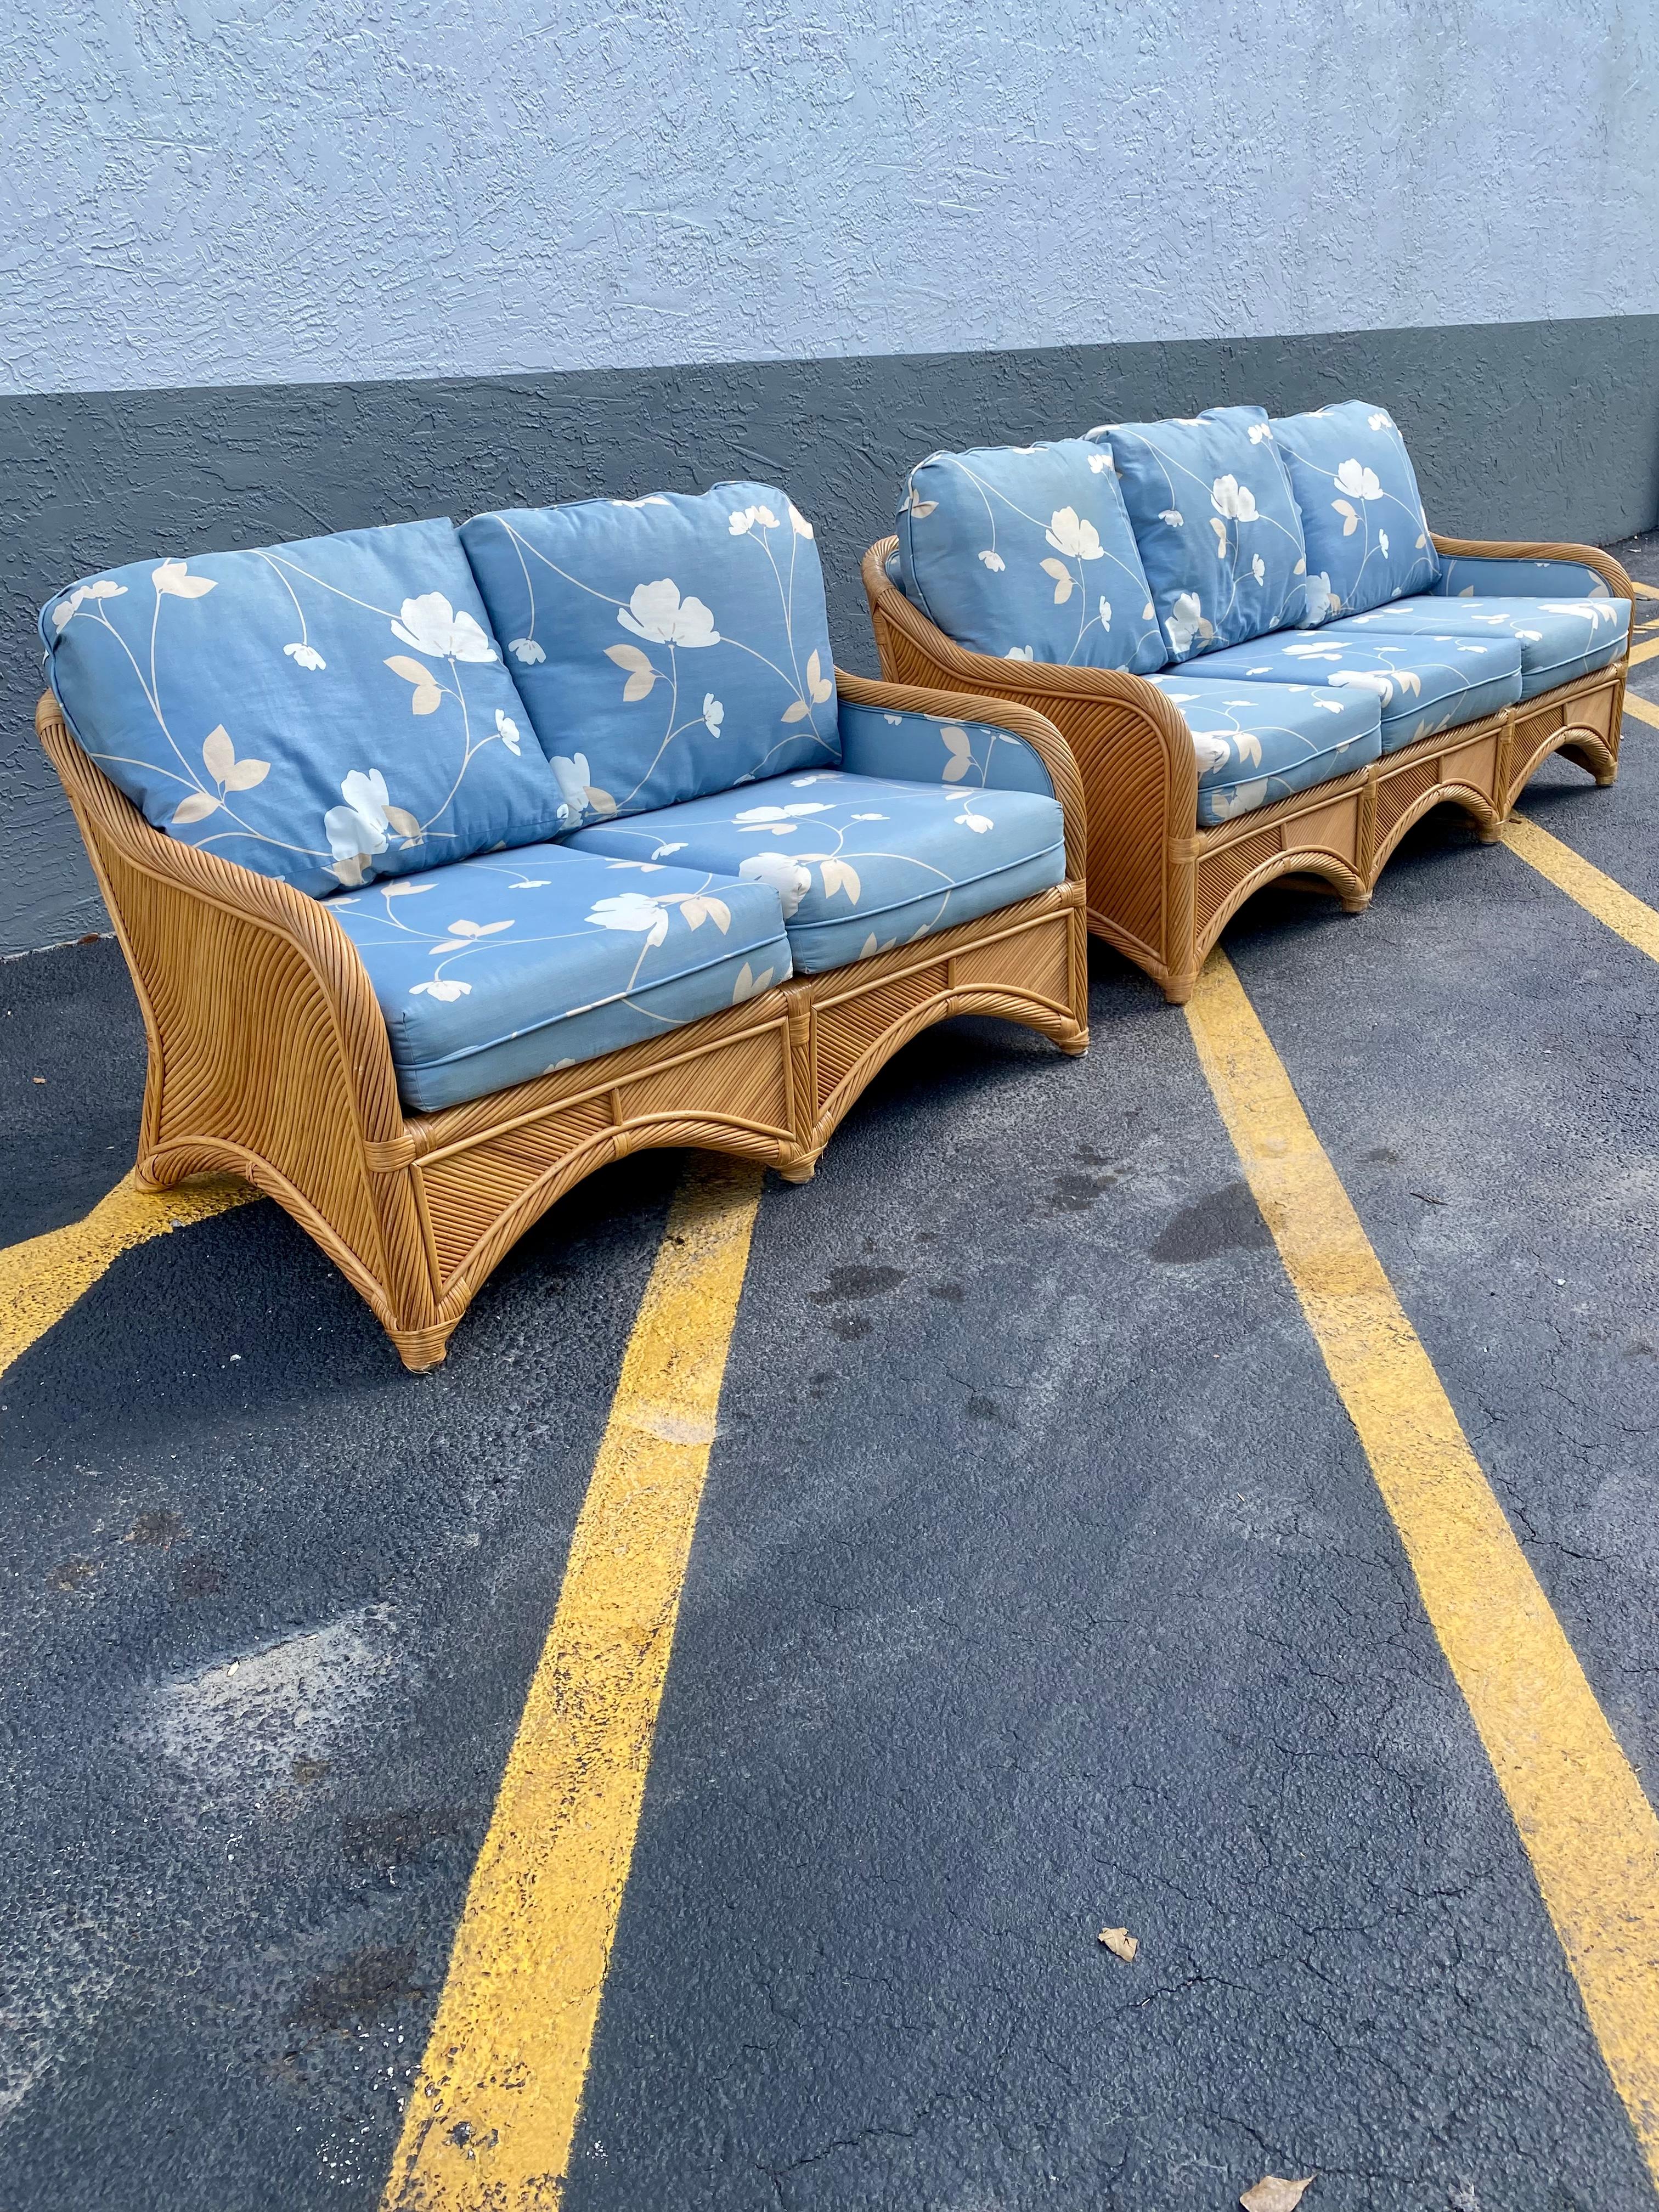 On offer on this occasion is one of the most stunning and rare reeded rattan living suite set you could hope to find. Outstanding design is exhibited throughout. The beautiful set is statement piece which is also extremely comfortable and packed